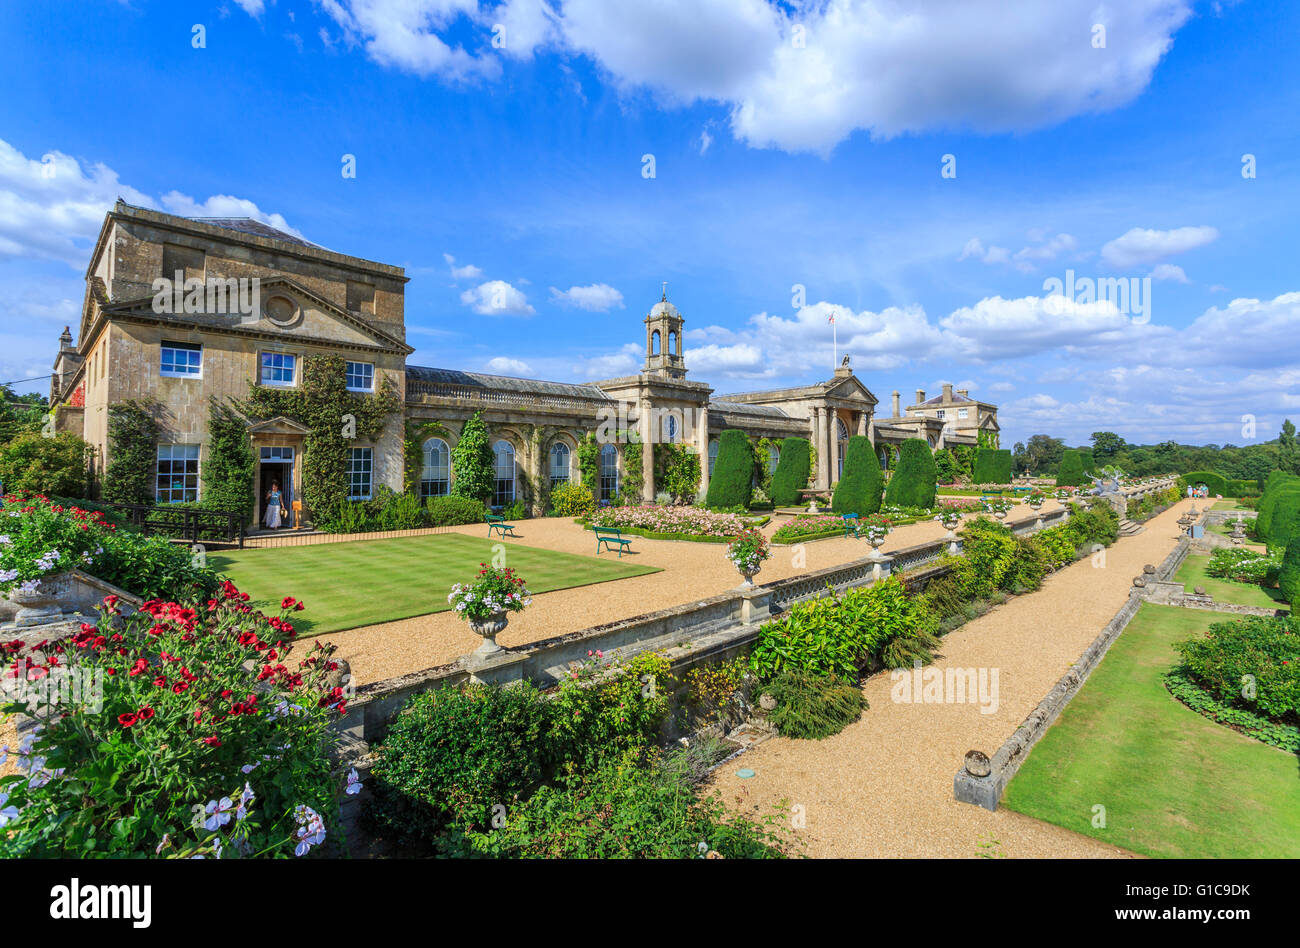 View of the front facade and Italianate terrace gardens of Bowood House, a stately home near Calne, Wiltshire, UK Stock Photo